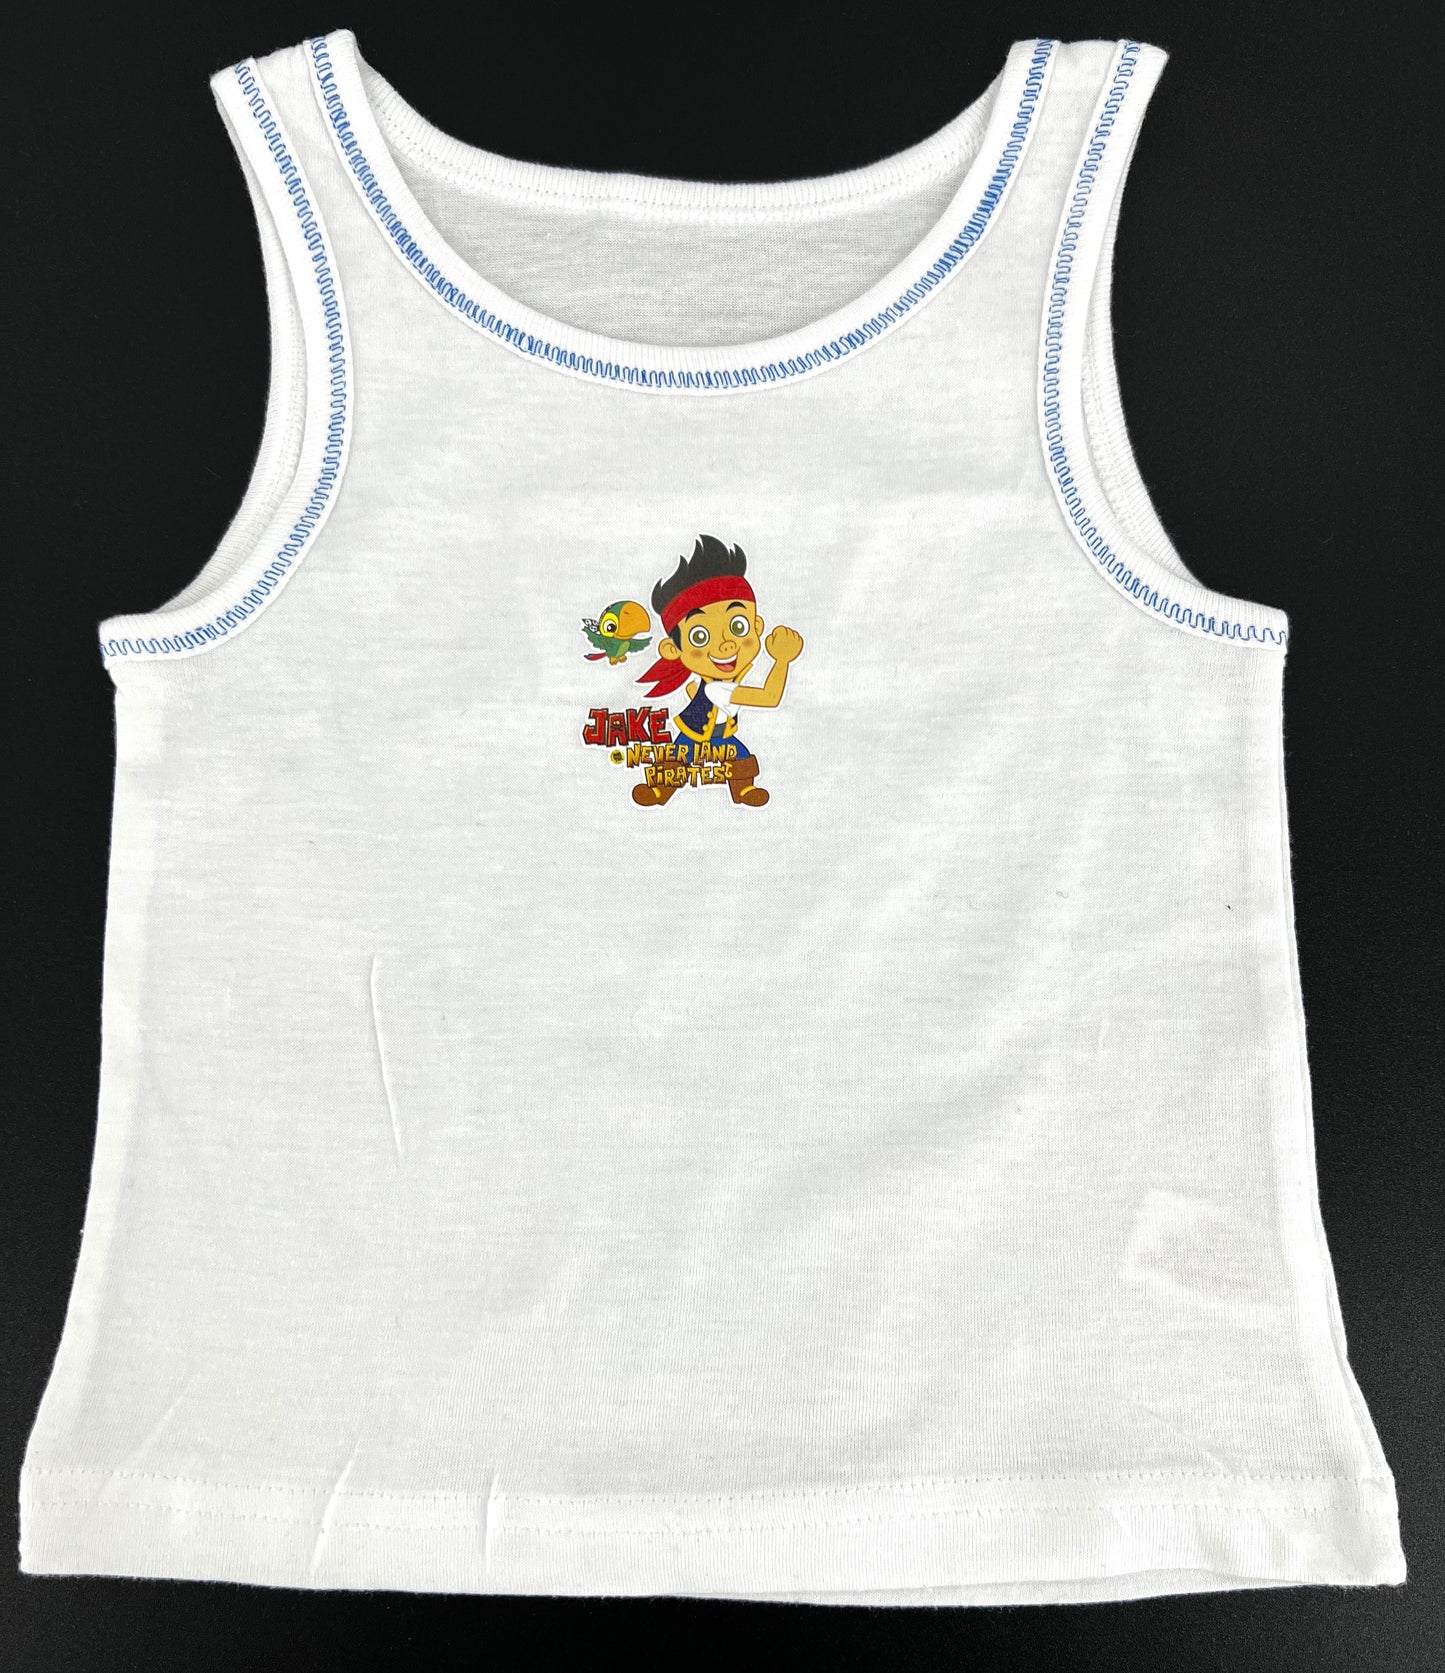 Jake and the Neverland Pirates Twin  Pack Vests Ages 18-24 Months